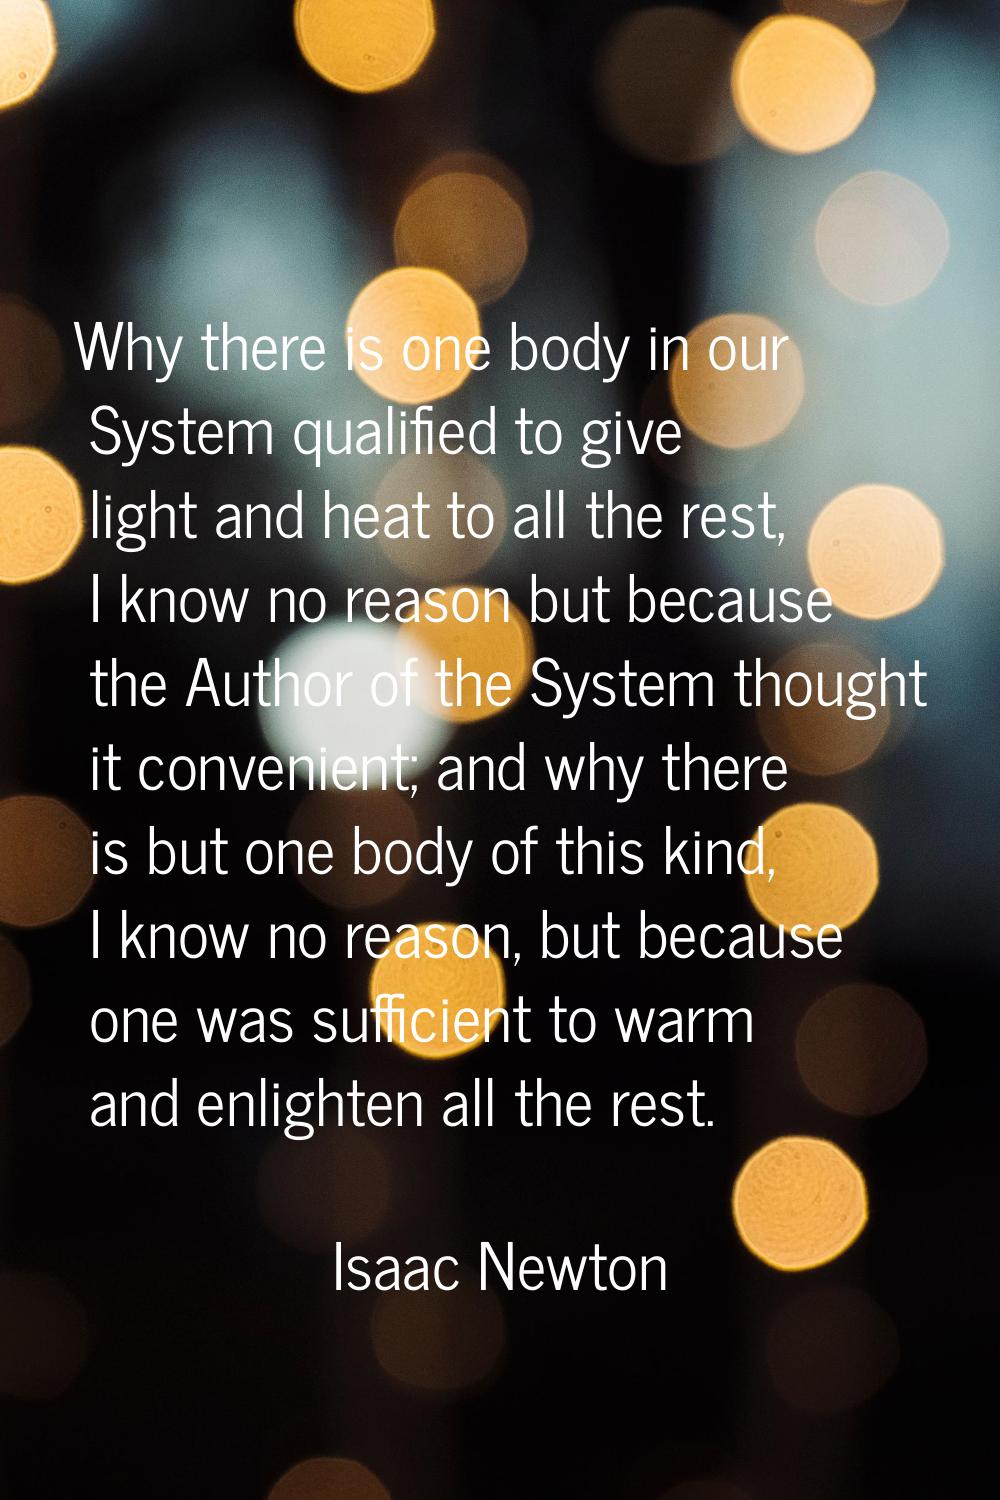 Why there is one body in our System qualified to give light and heat to all the rest, I know no rea